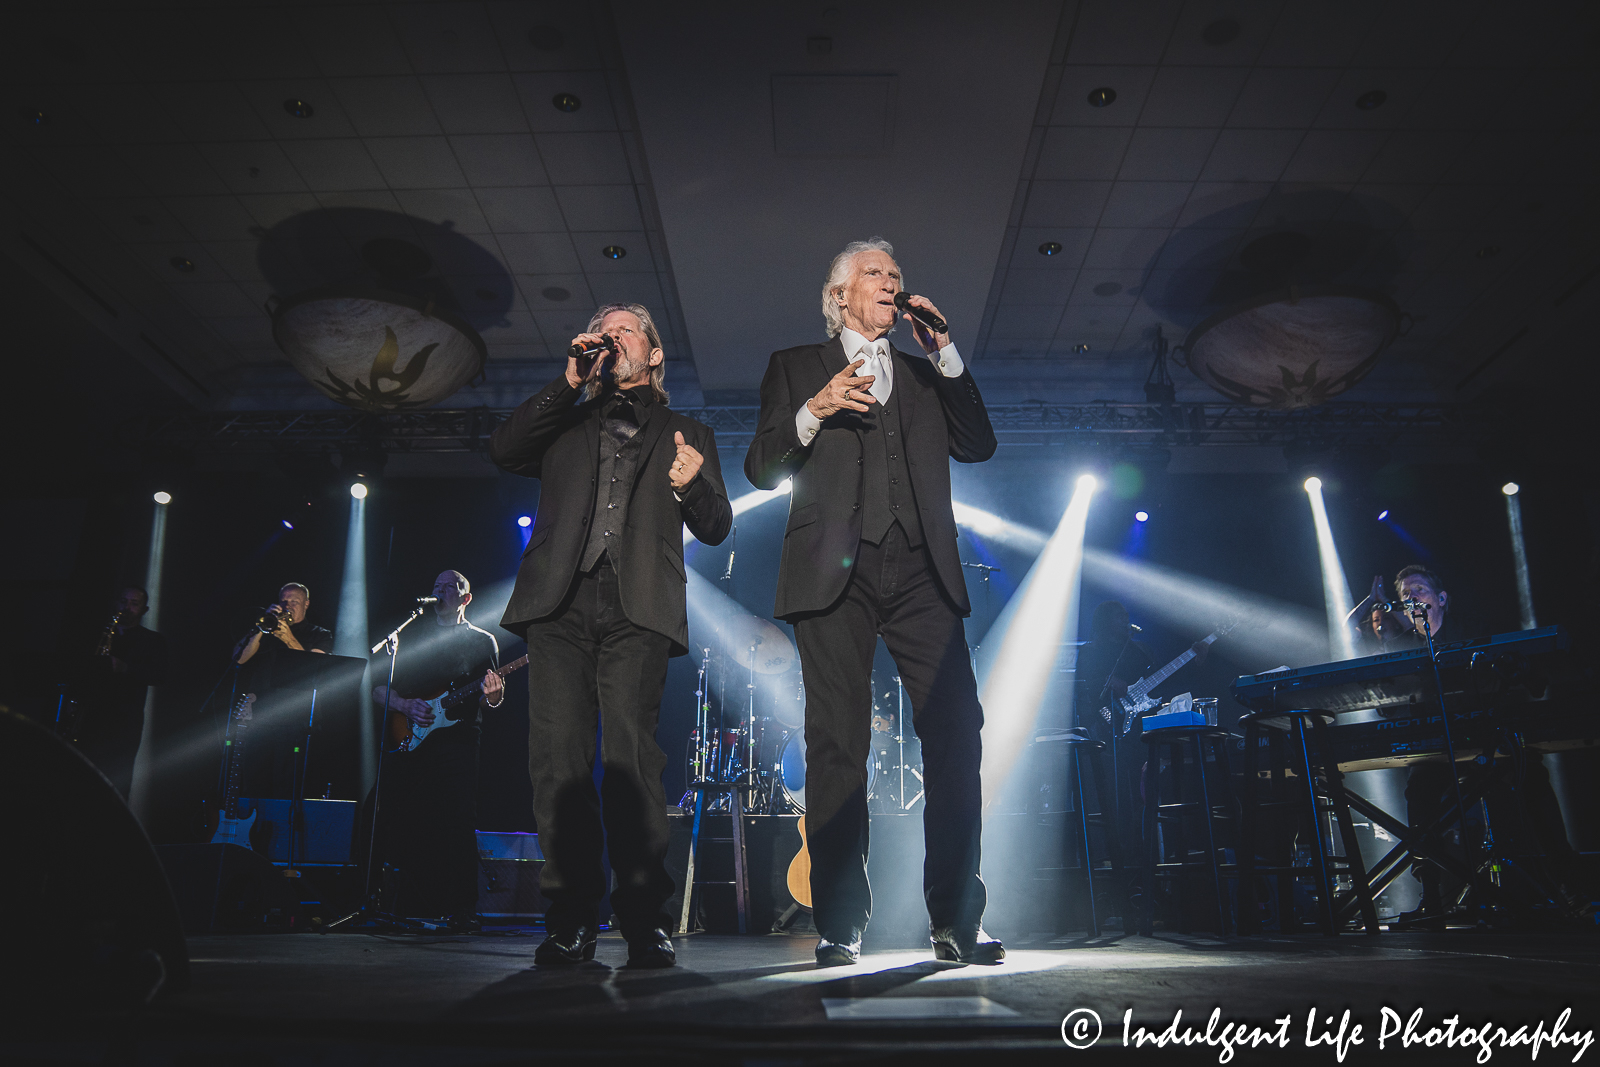 The Righteous Brothers duo of Bill Medley and Bucky Heard live in concert at Prairie Band Casino in Mayetta, KS on June 29, 2023.